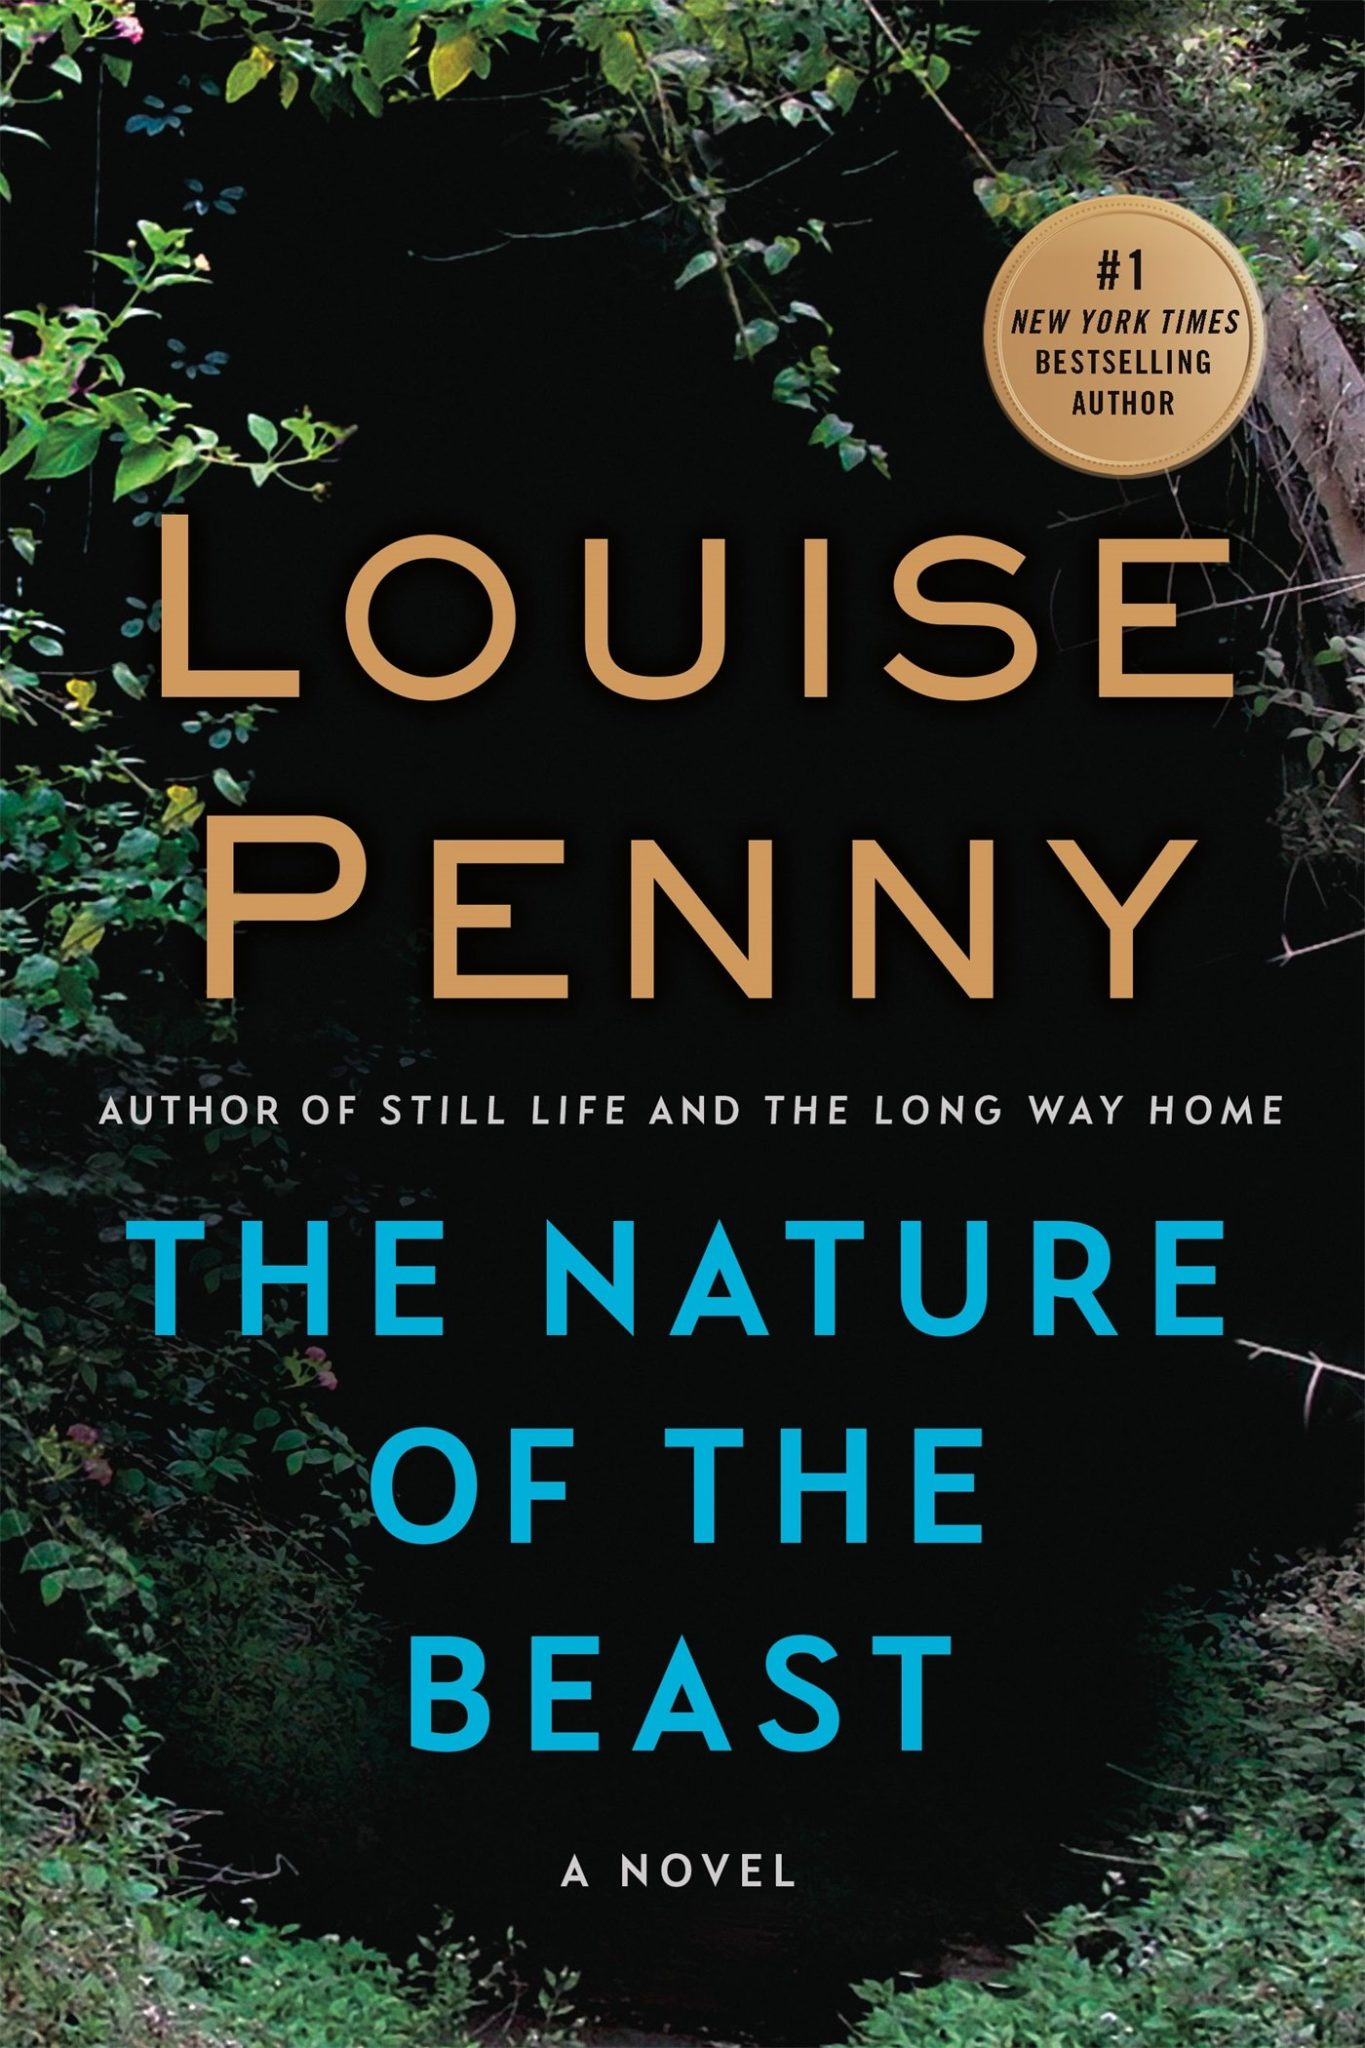 Louise Penny books and biography